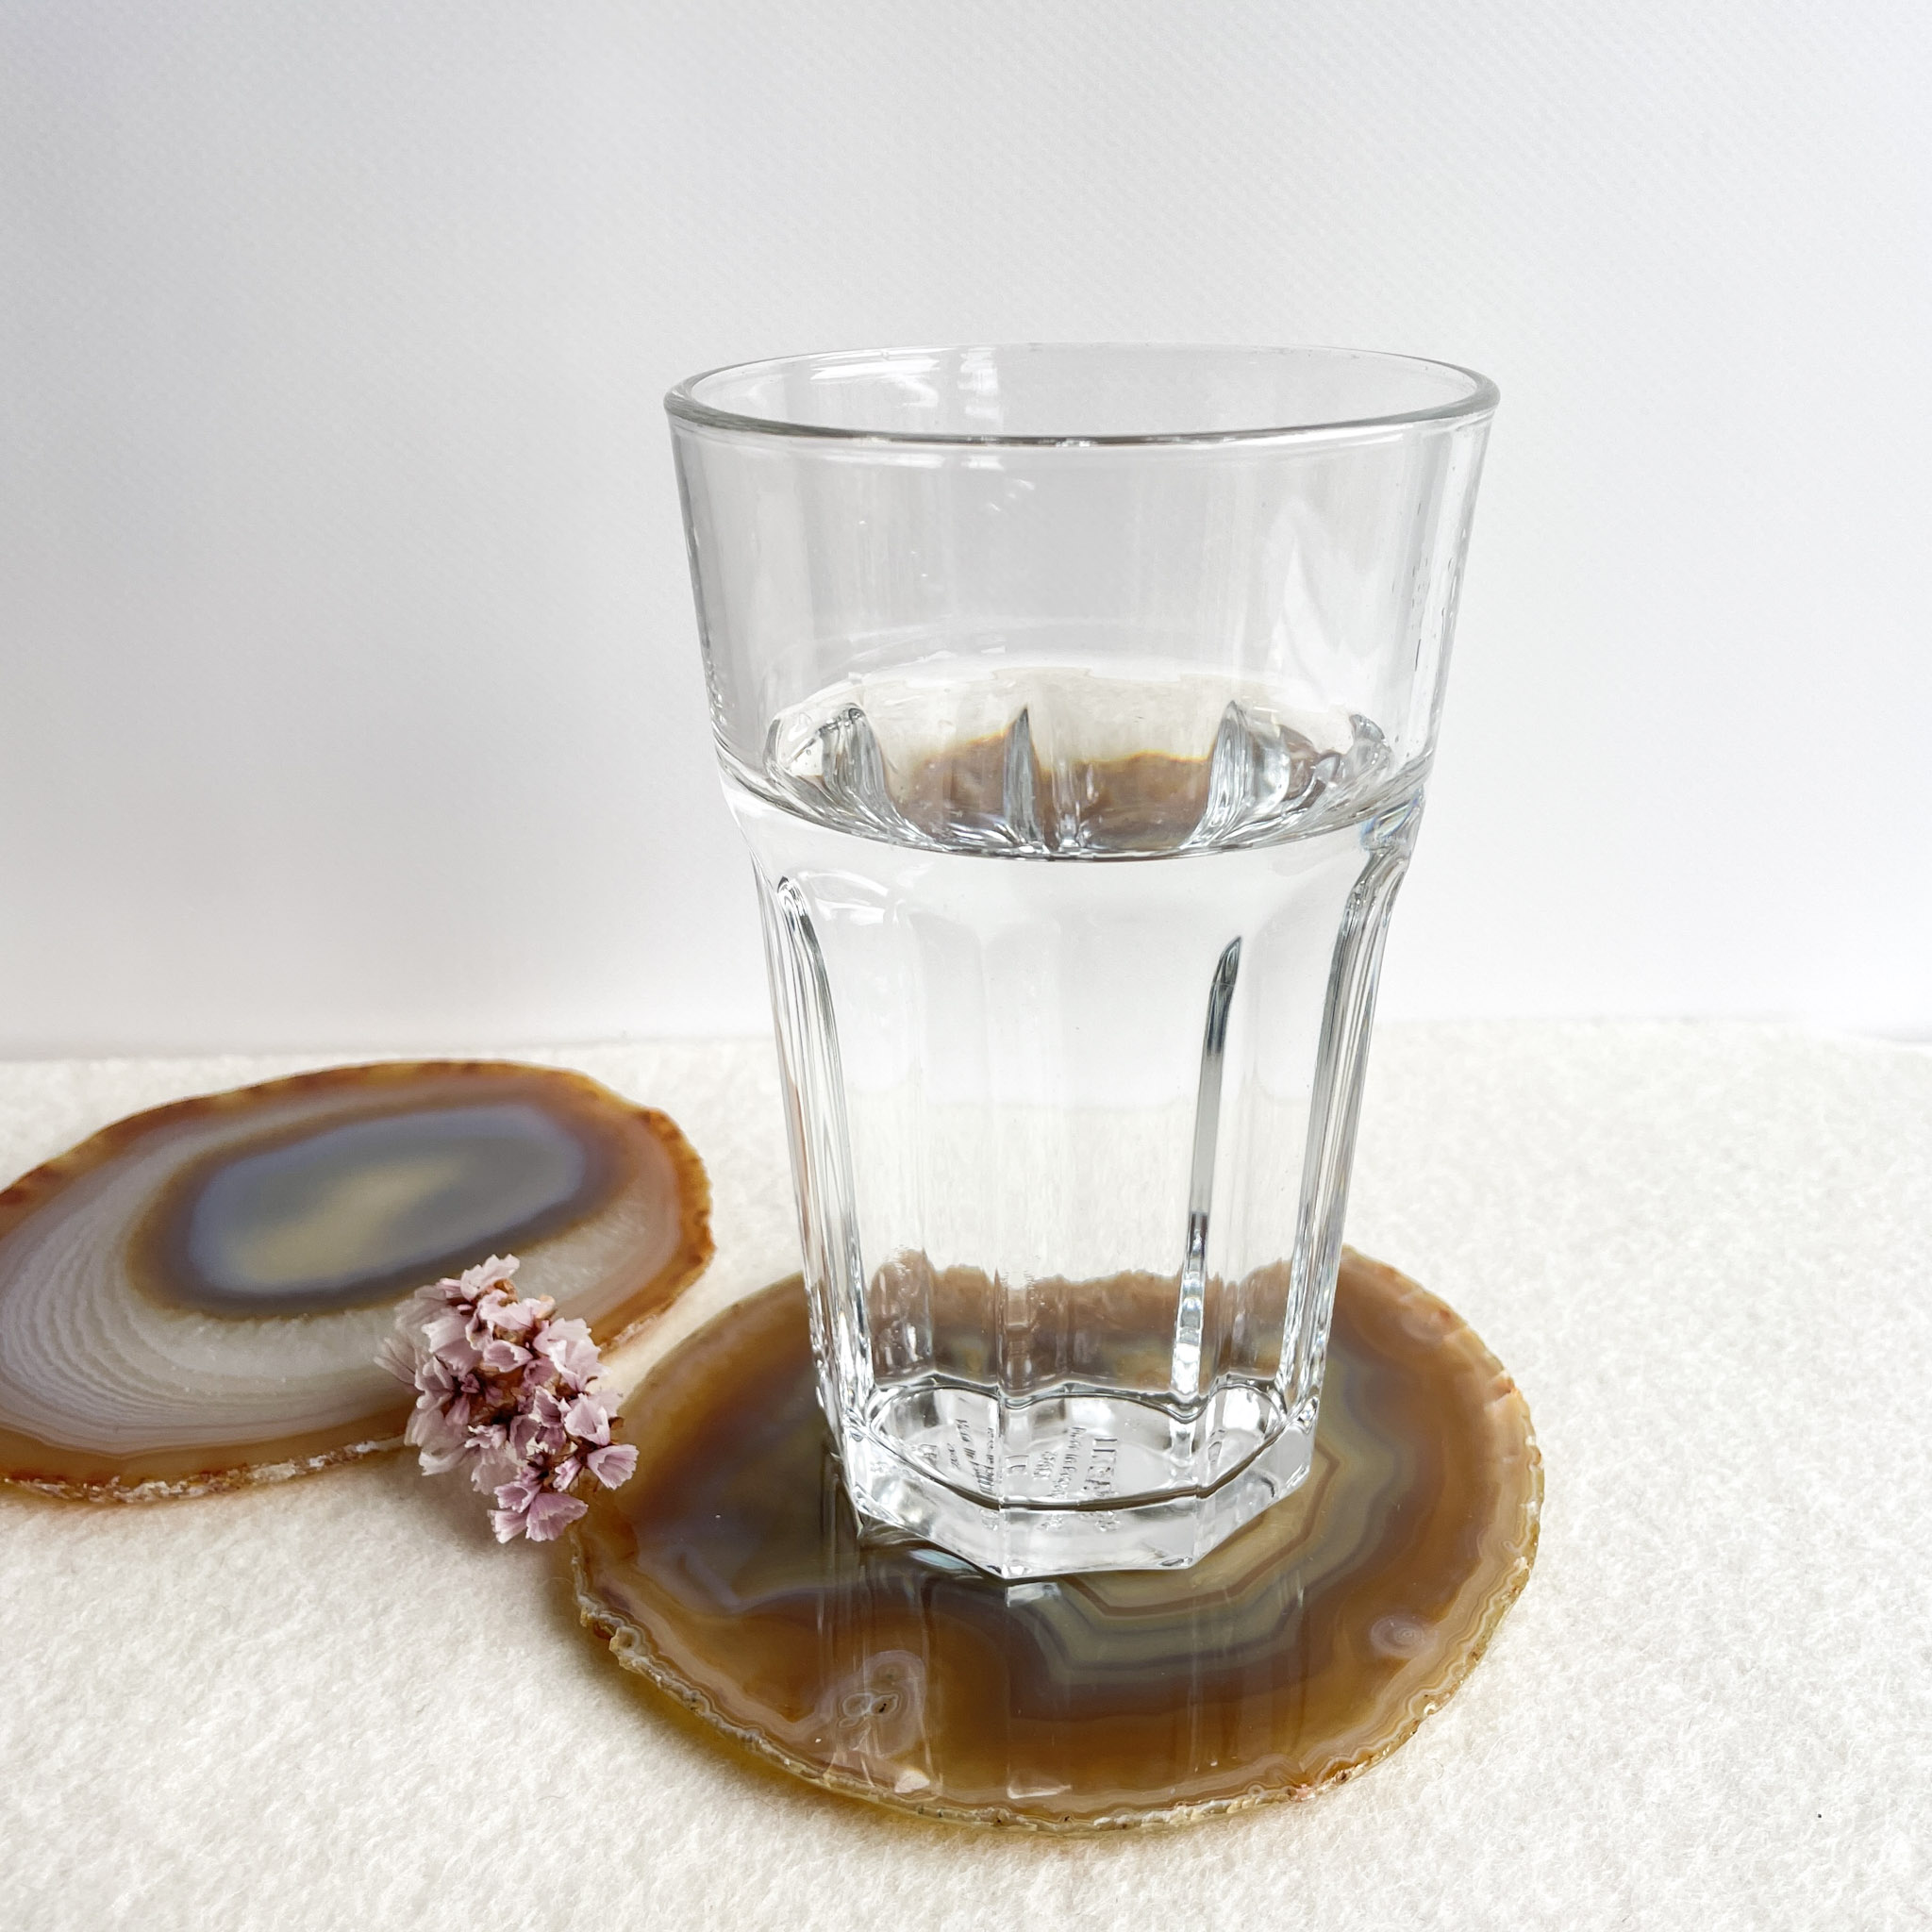 A half-full glass of water placed on a brown and white agate coaster, with a smaller slice of agate next to it adorned with small pink flowers, on a cream textured surface with a white background.